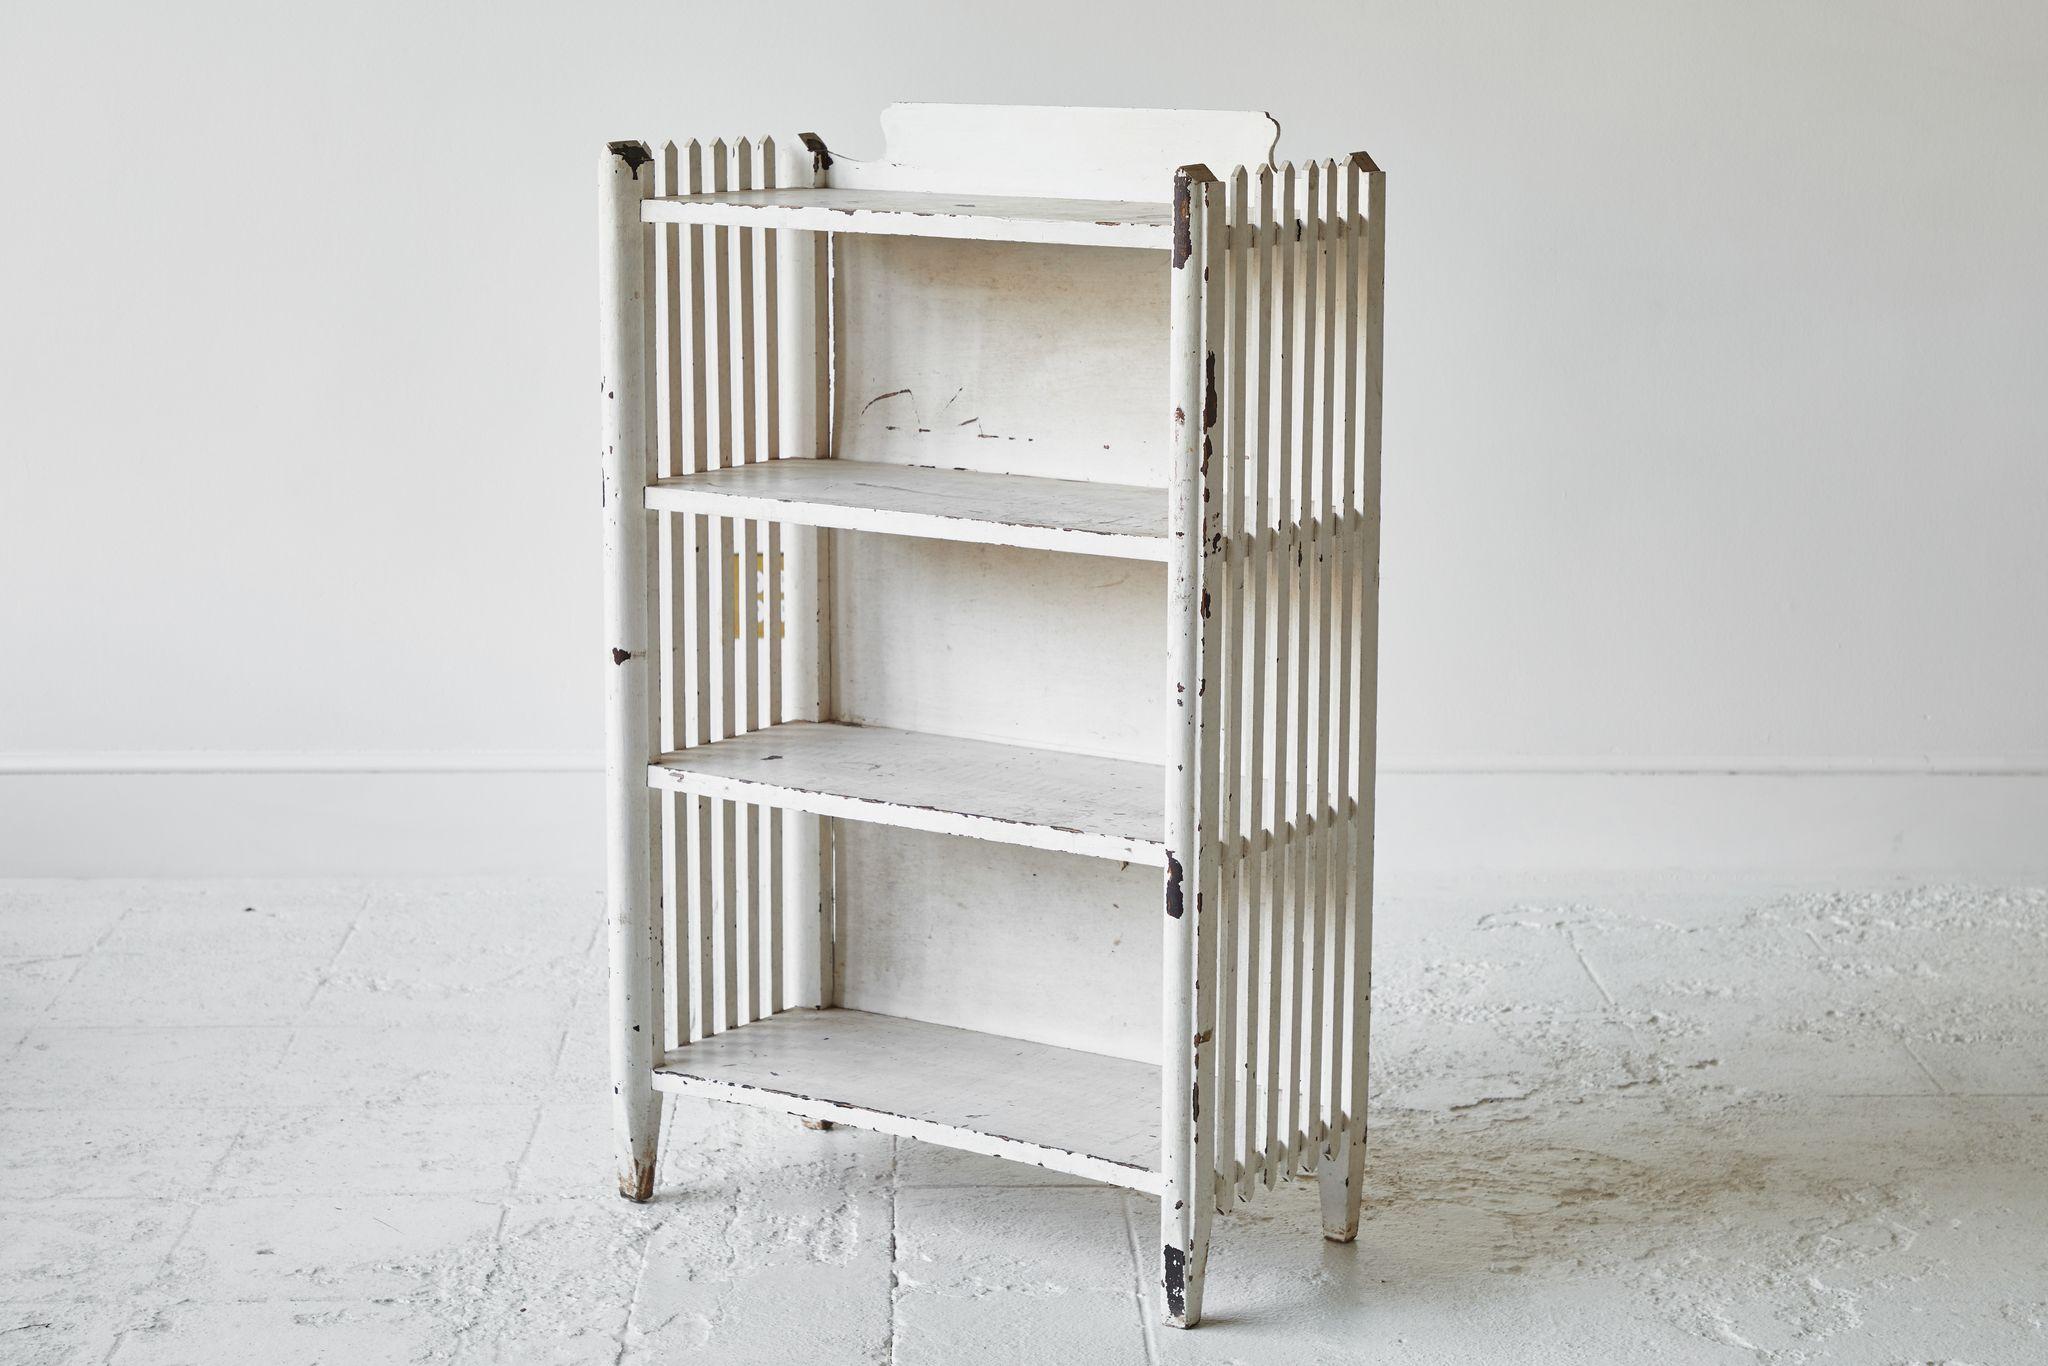 Early American white painted shelf with four shelves and slatted sides.